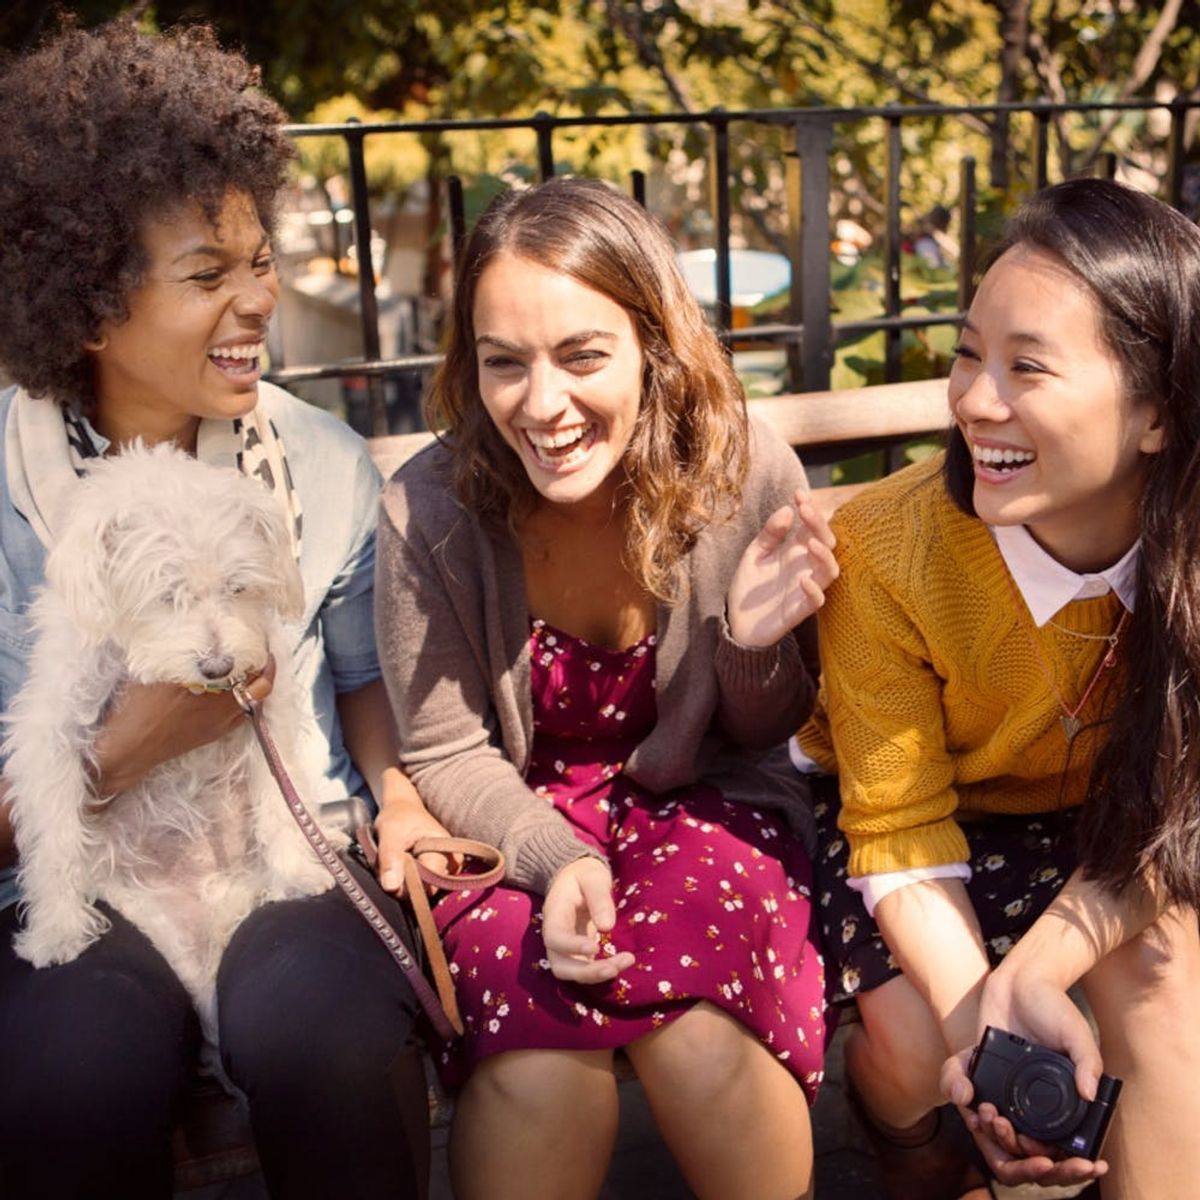 How to Maintain Friendships When You’re in Different Stages of Life